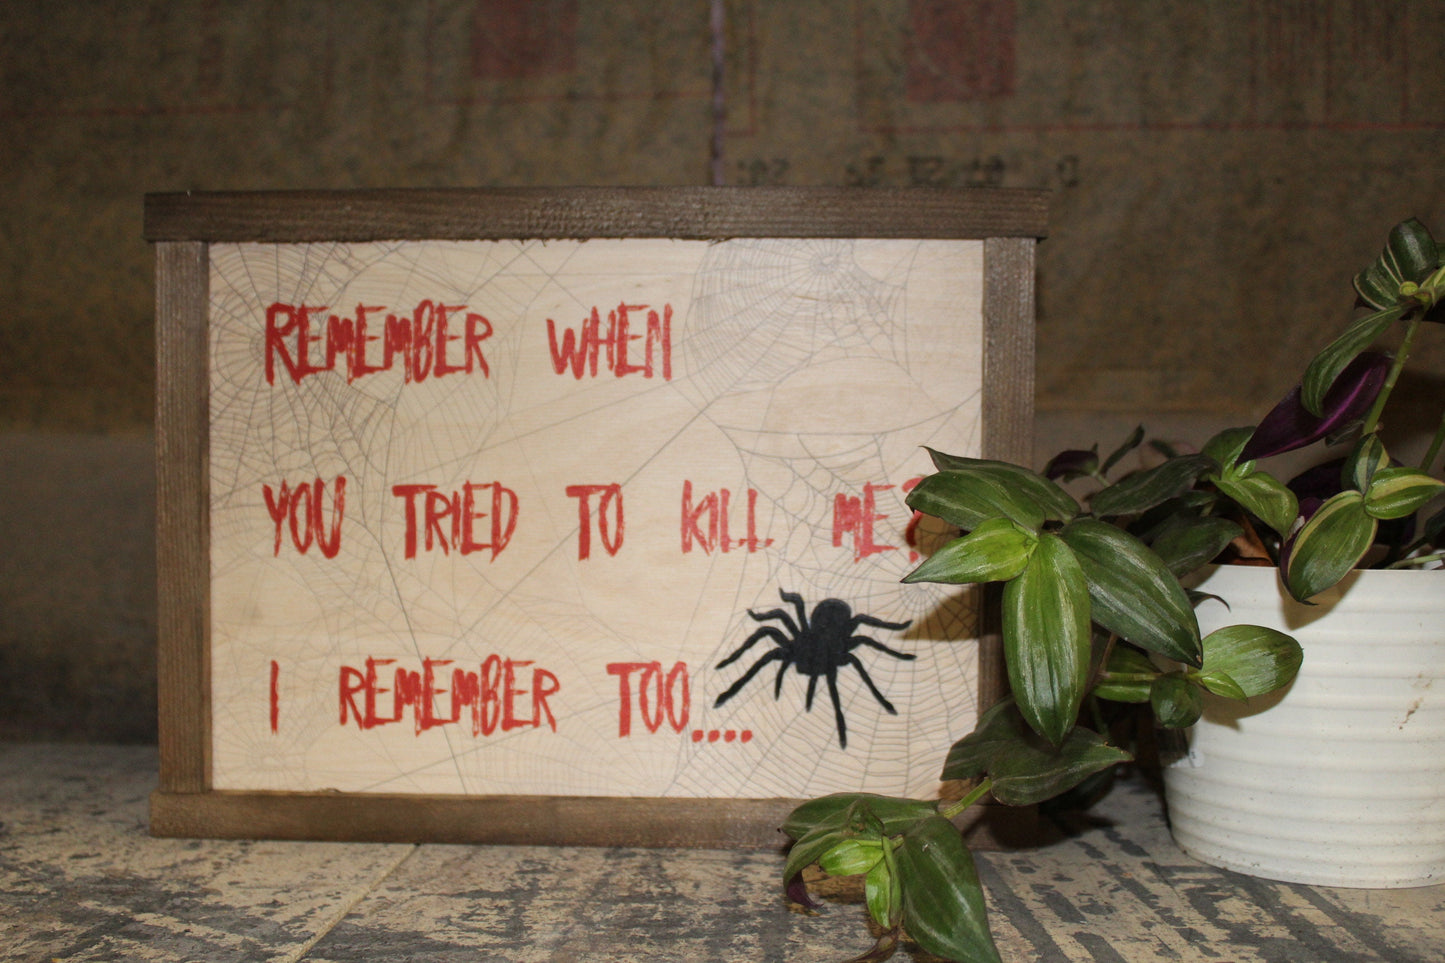 Spider Scary Sign Wood Decor Halloween Fall Remember When You Tried To Kill Me Decoration Joke Wall Décor Wood Print 3D Tarantula Web Funny